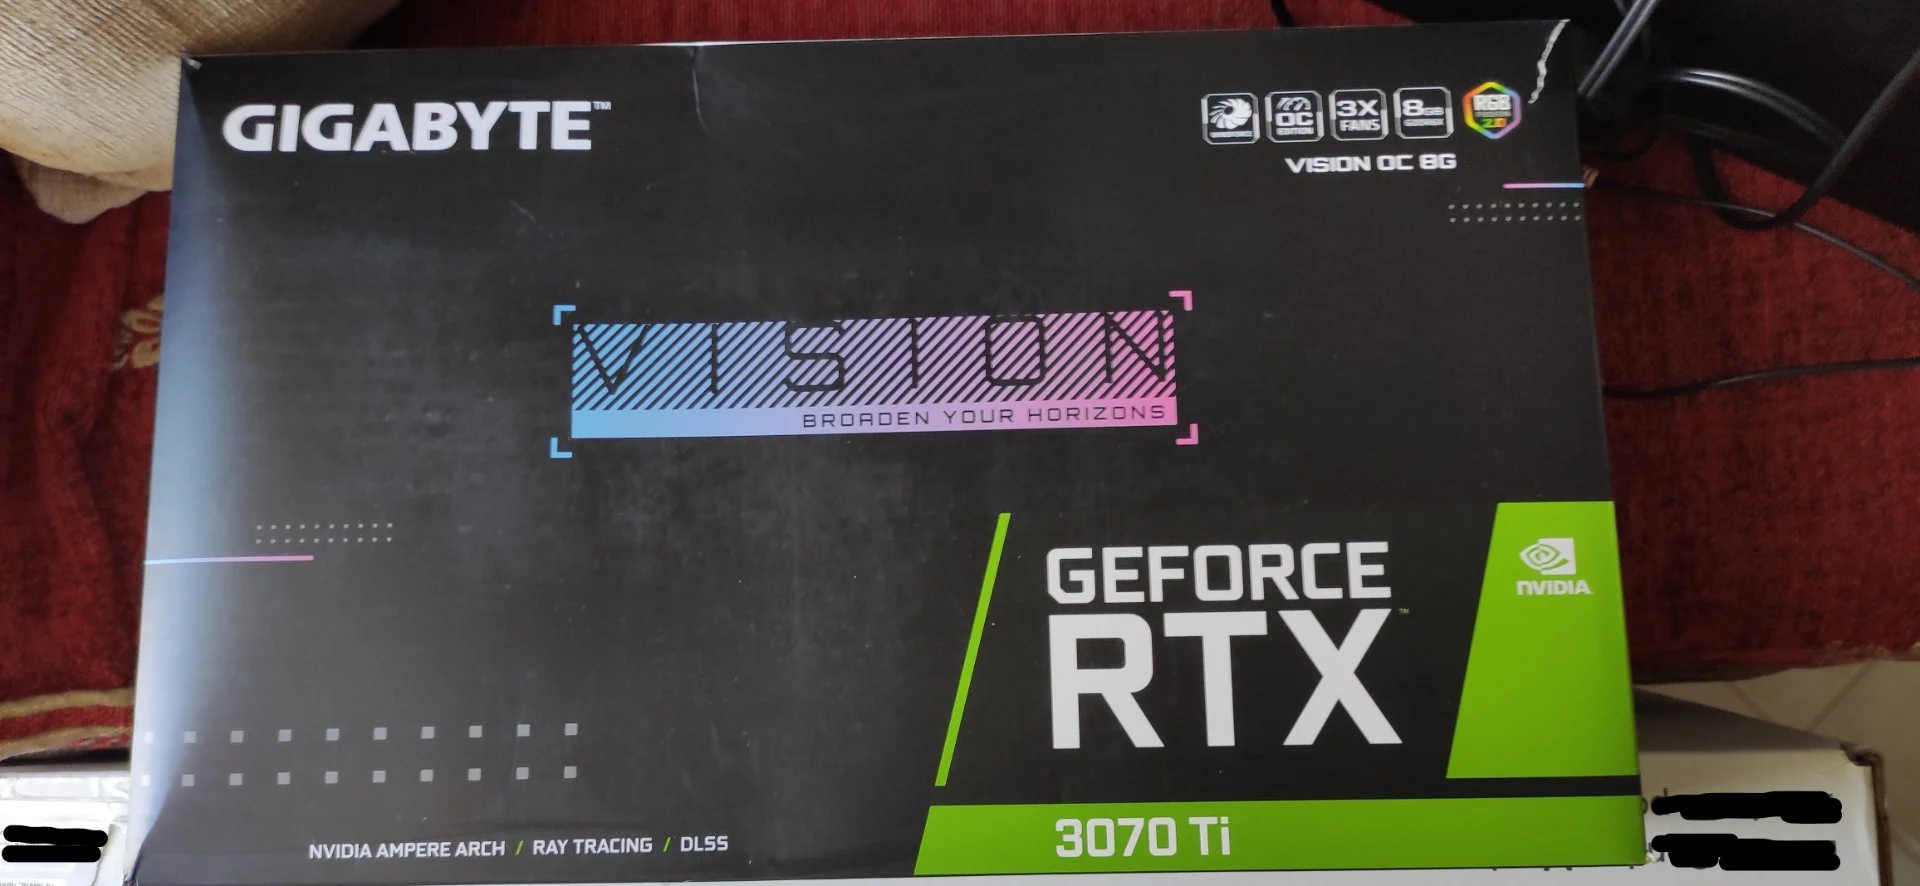 More information about "Gigabyte GeForce RTX 3070 Ti VISION OC 8G"